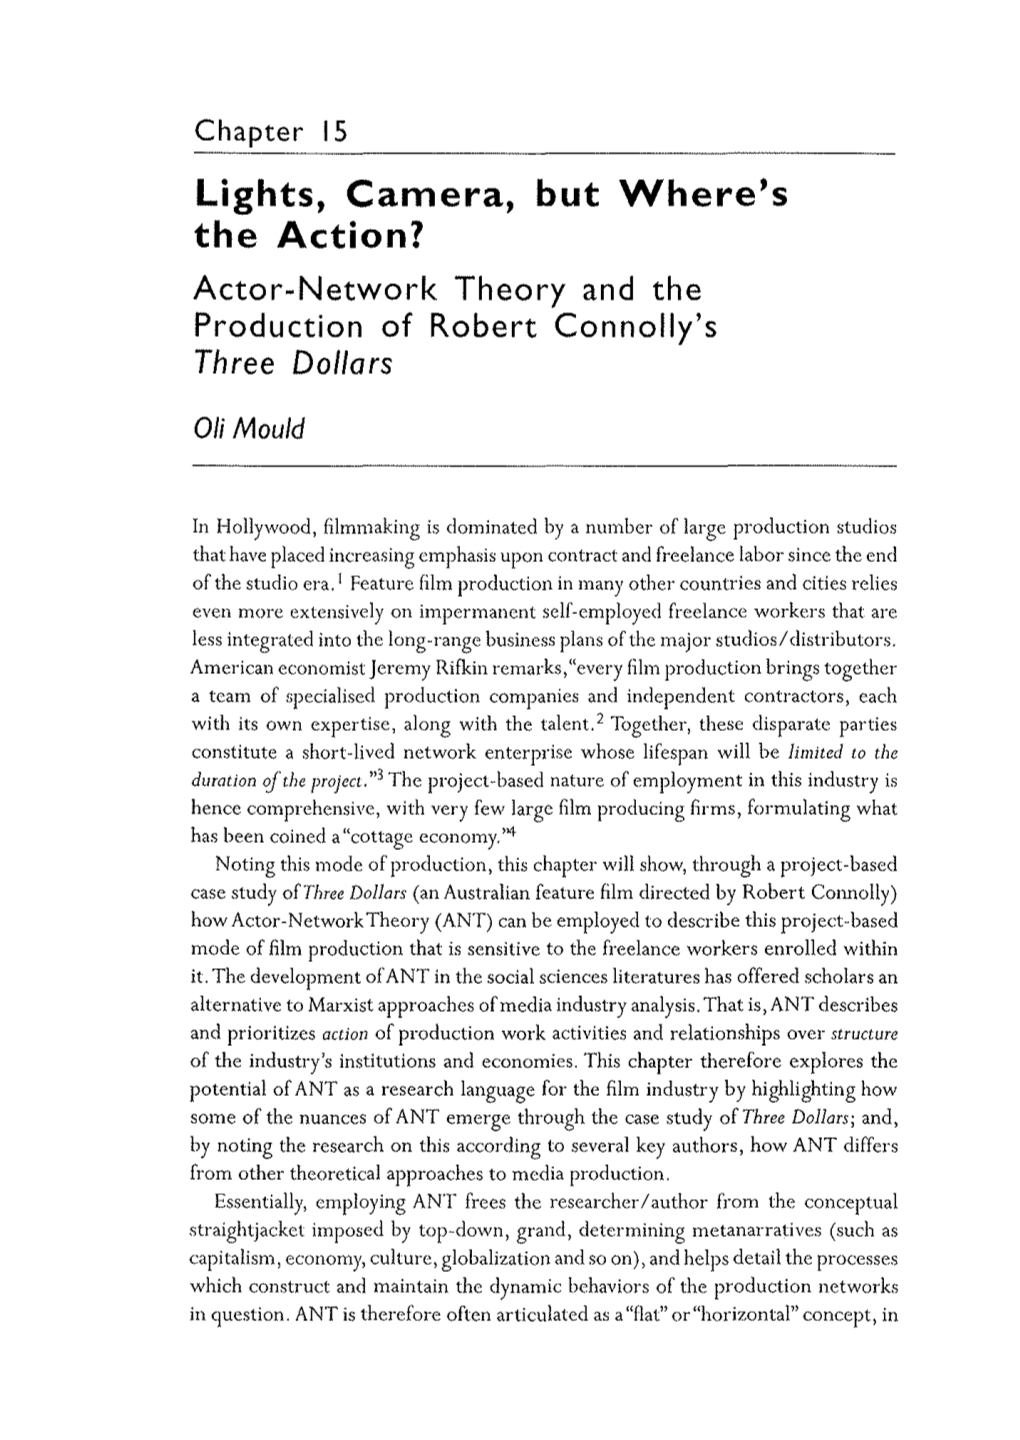 Lights, Camera, but Where's the Action? Actor-Network Theory and the Production of Robert Connelly's Three Dollars